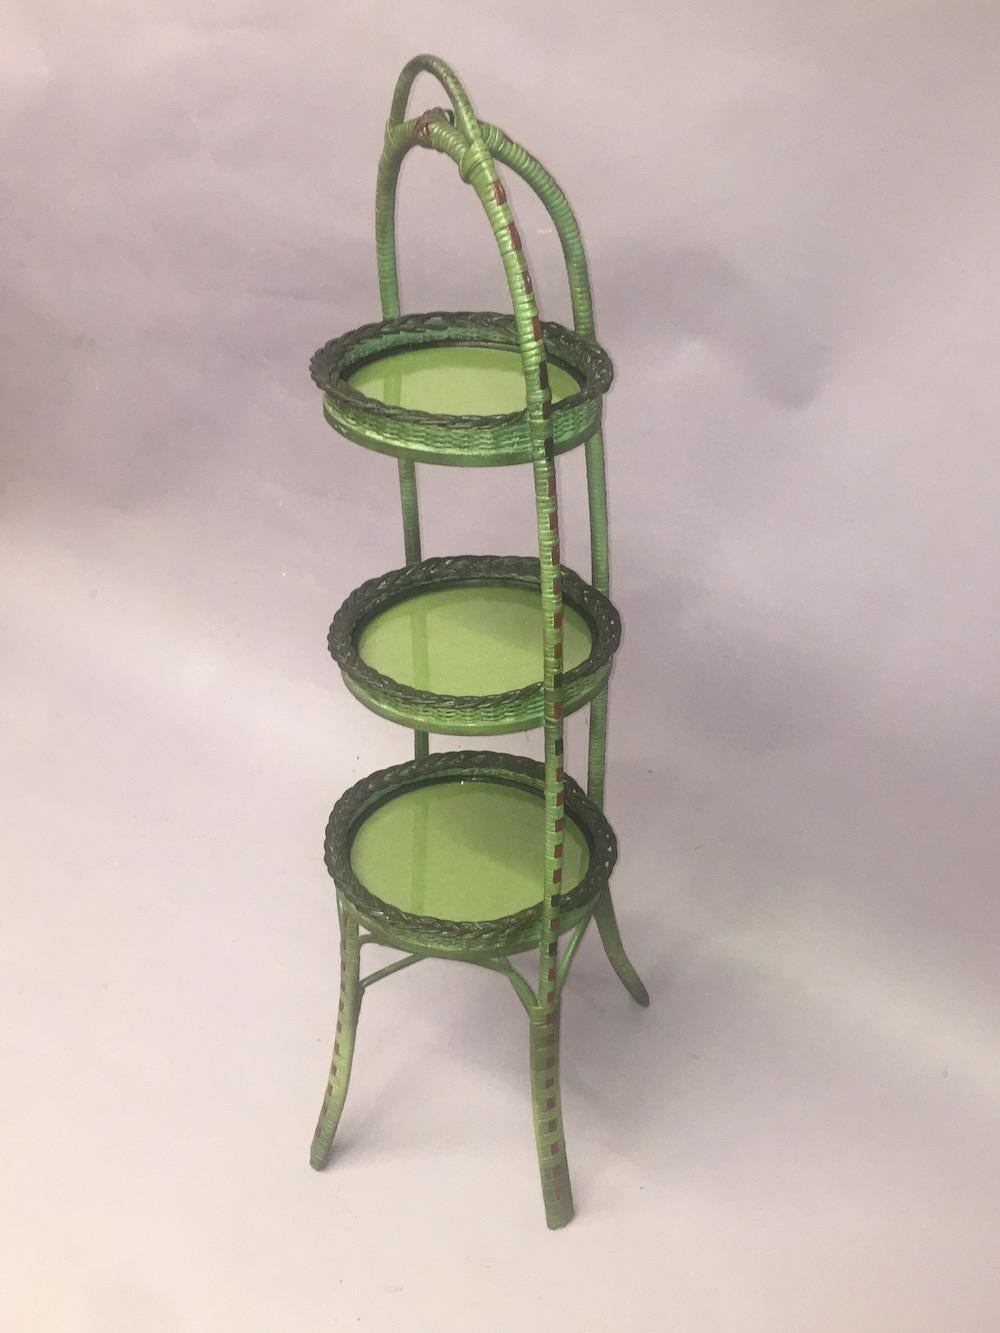 American A Wicker Pie / Hors- d'oeuvres Server in French Green Finish For Sale